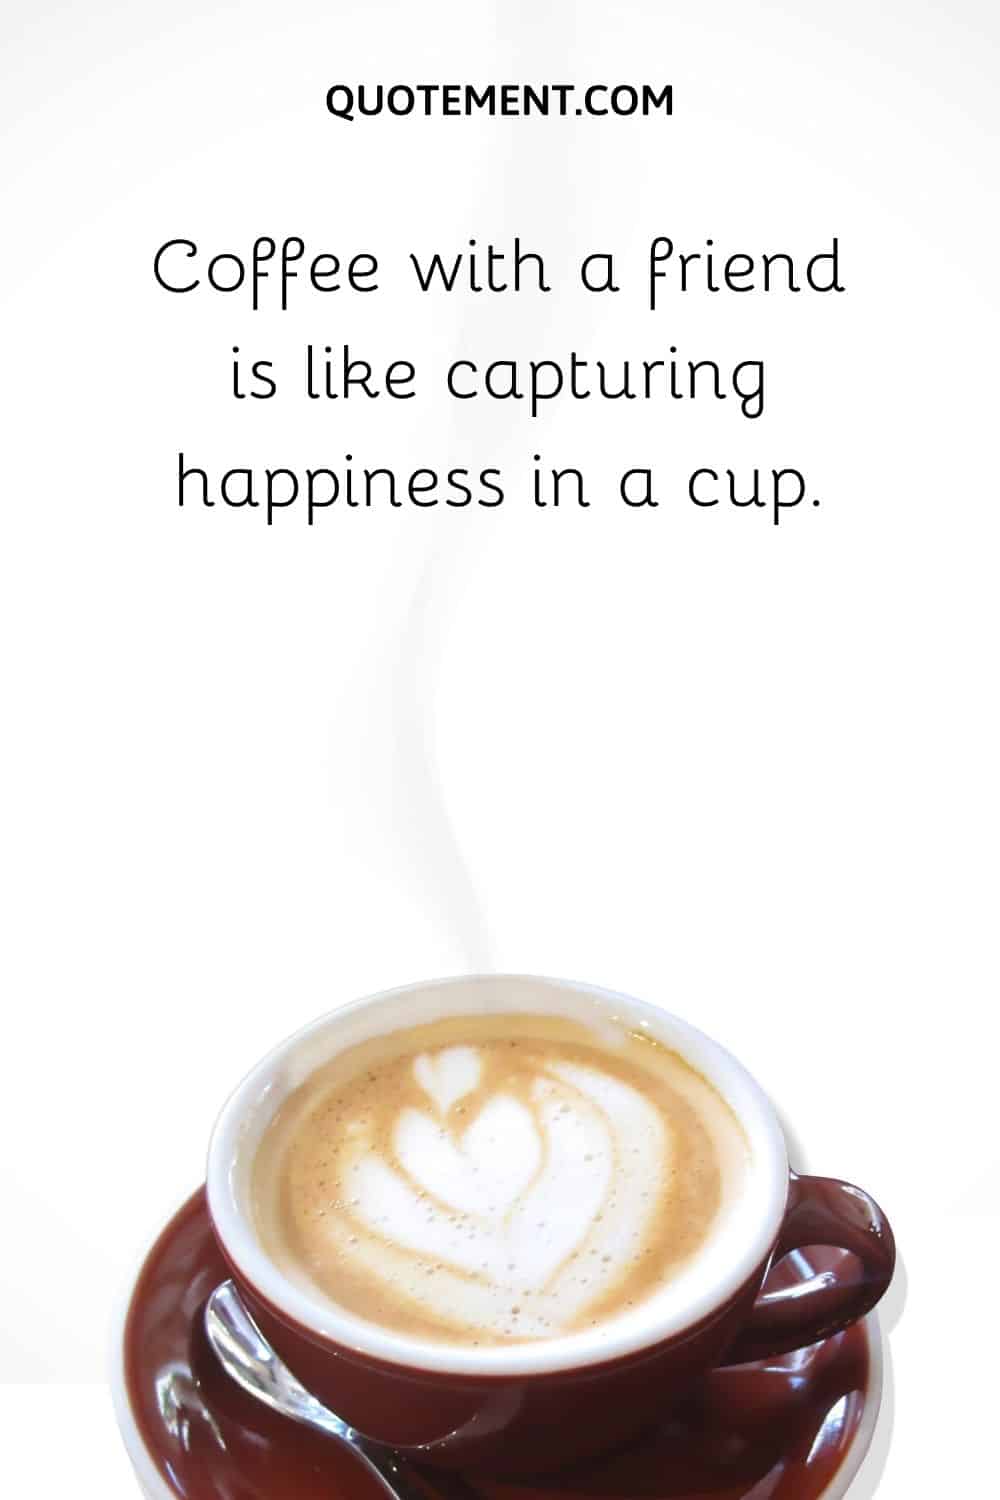 Coffee with a friend is like capturing happiness in a cup